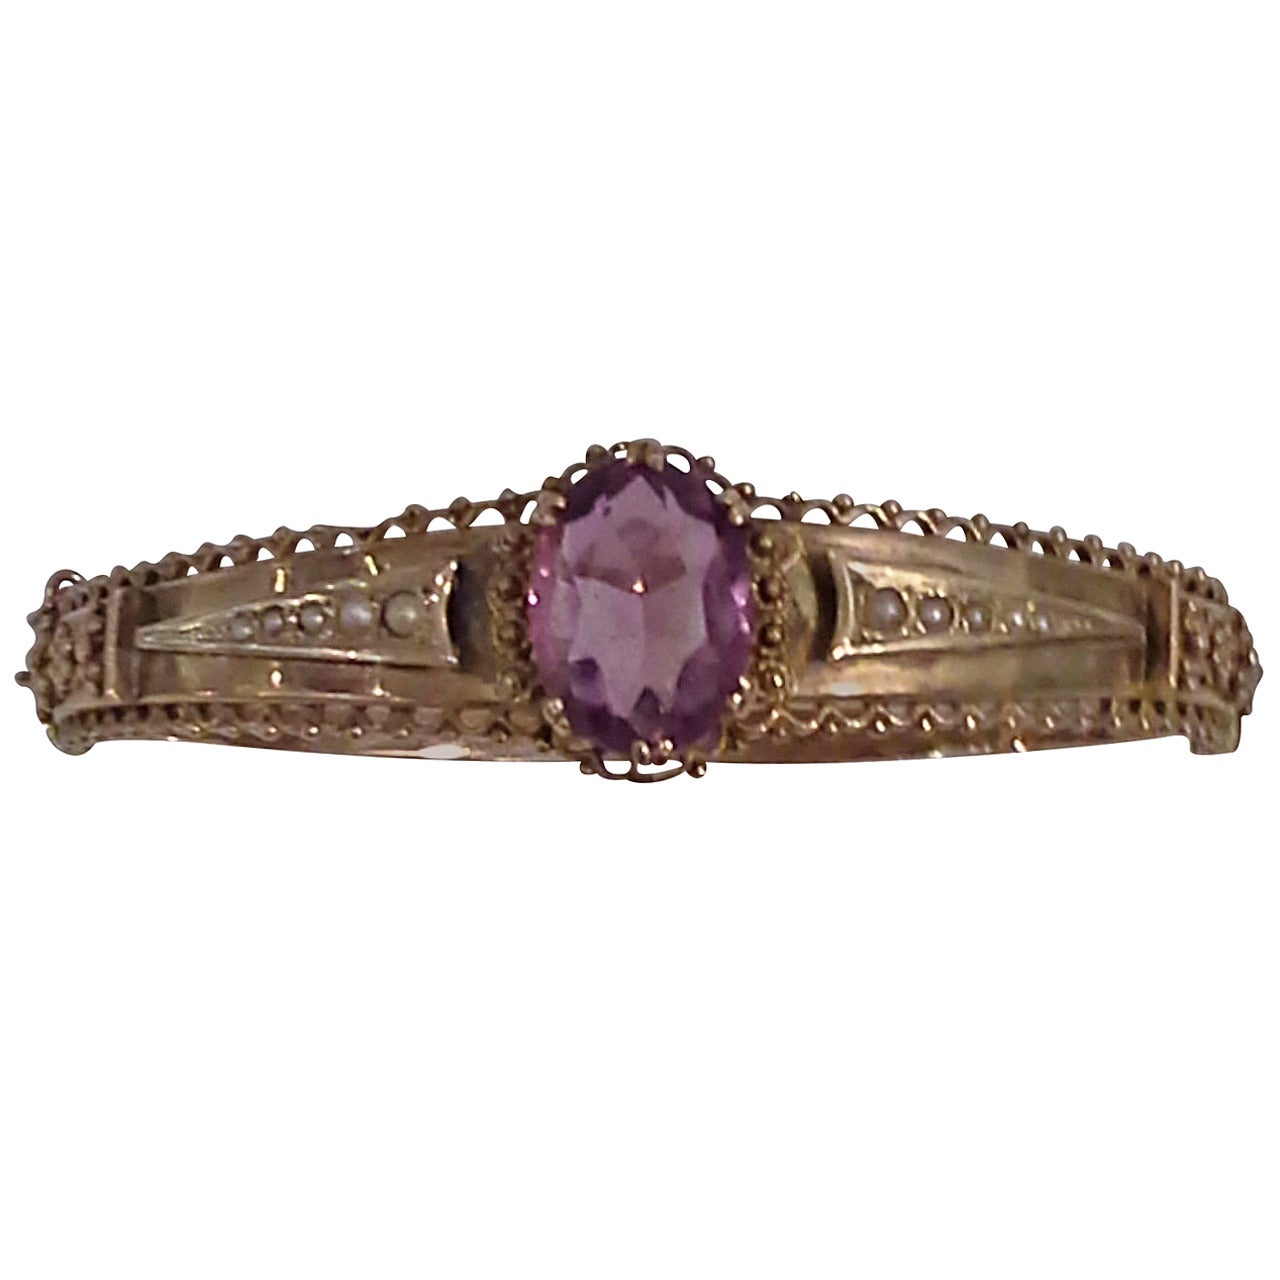 Victorian Amethyst and Seed Pearl Bangle or Bracelet 9k Gold, Stamped .375